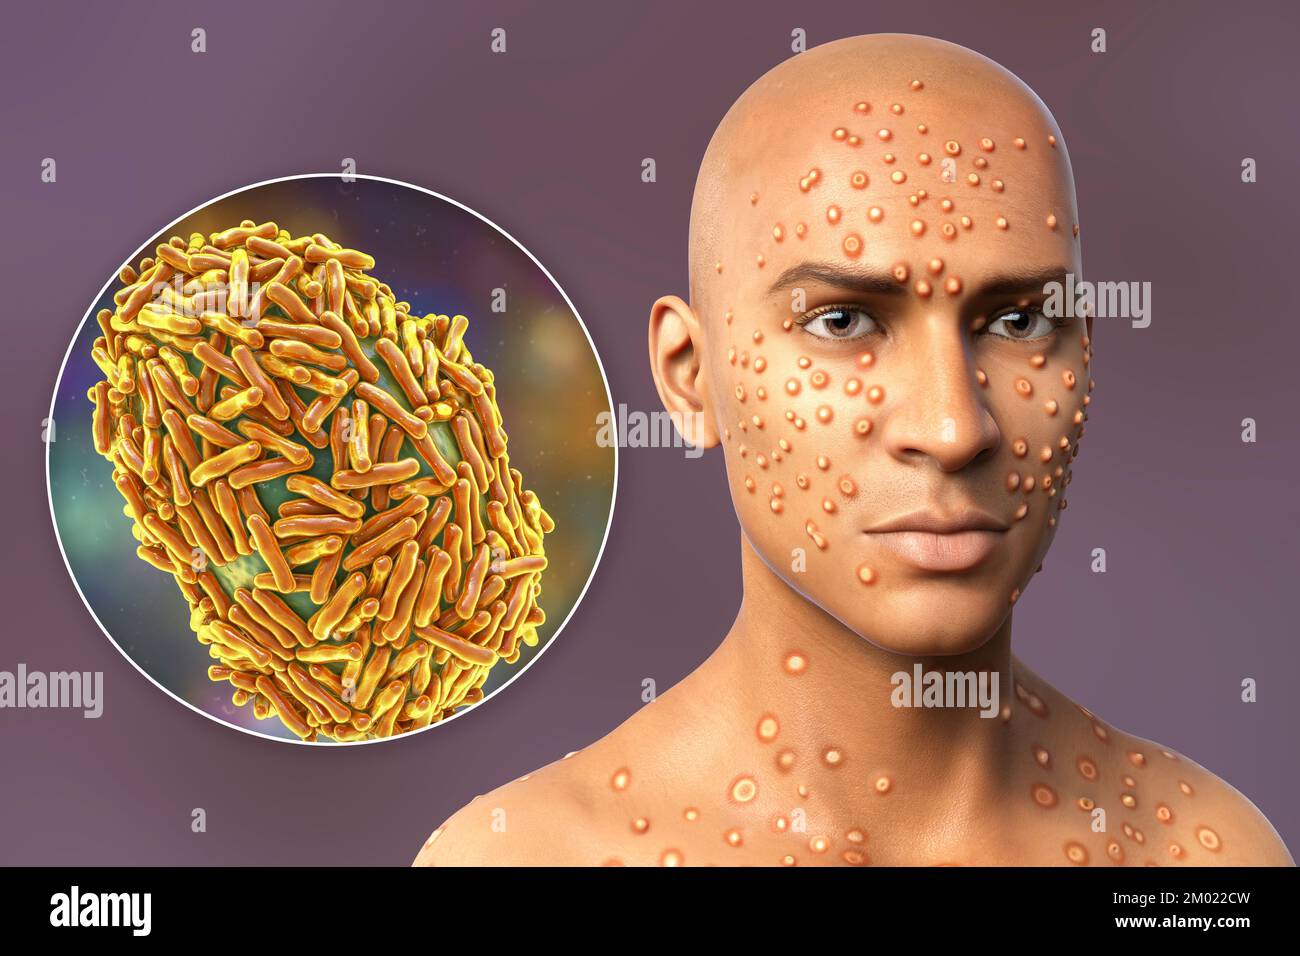 Patient with monkeypox infection, computer illustration. Monkeypox is a zoonotic virus from the Poxviridae family that causes monkeypox, a pox-like di Stock Photo